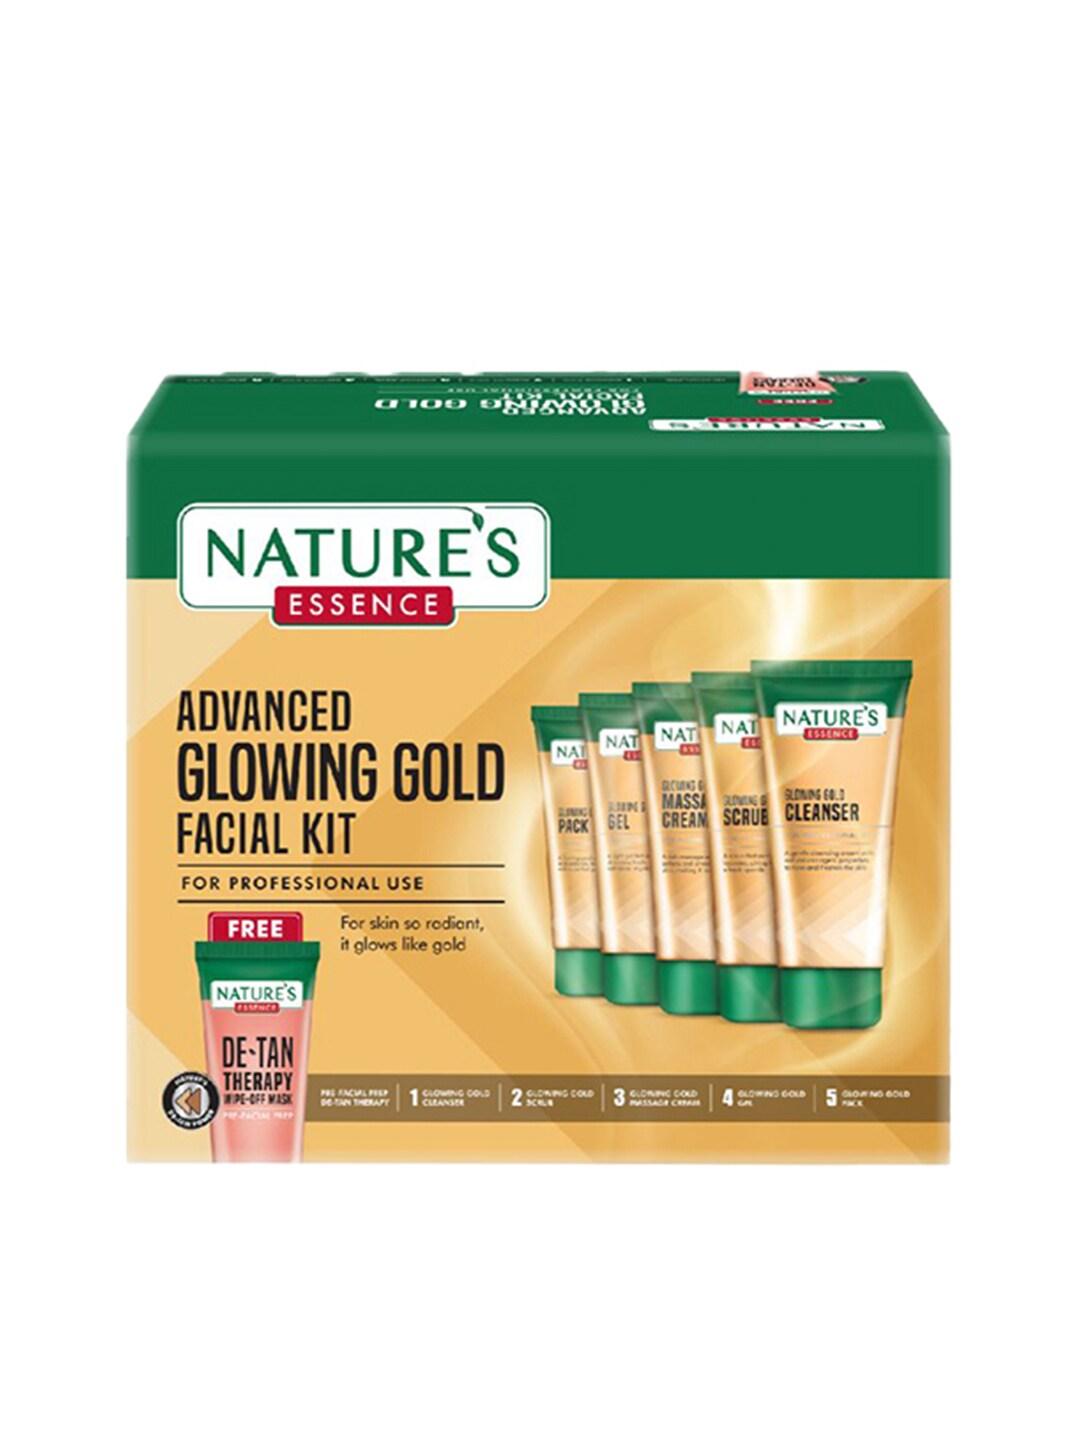 Natures Essence Advanced Glowing Gold Facial Kit - 250g + 50ml